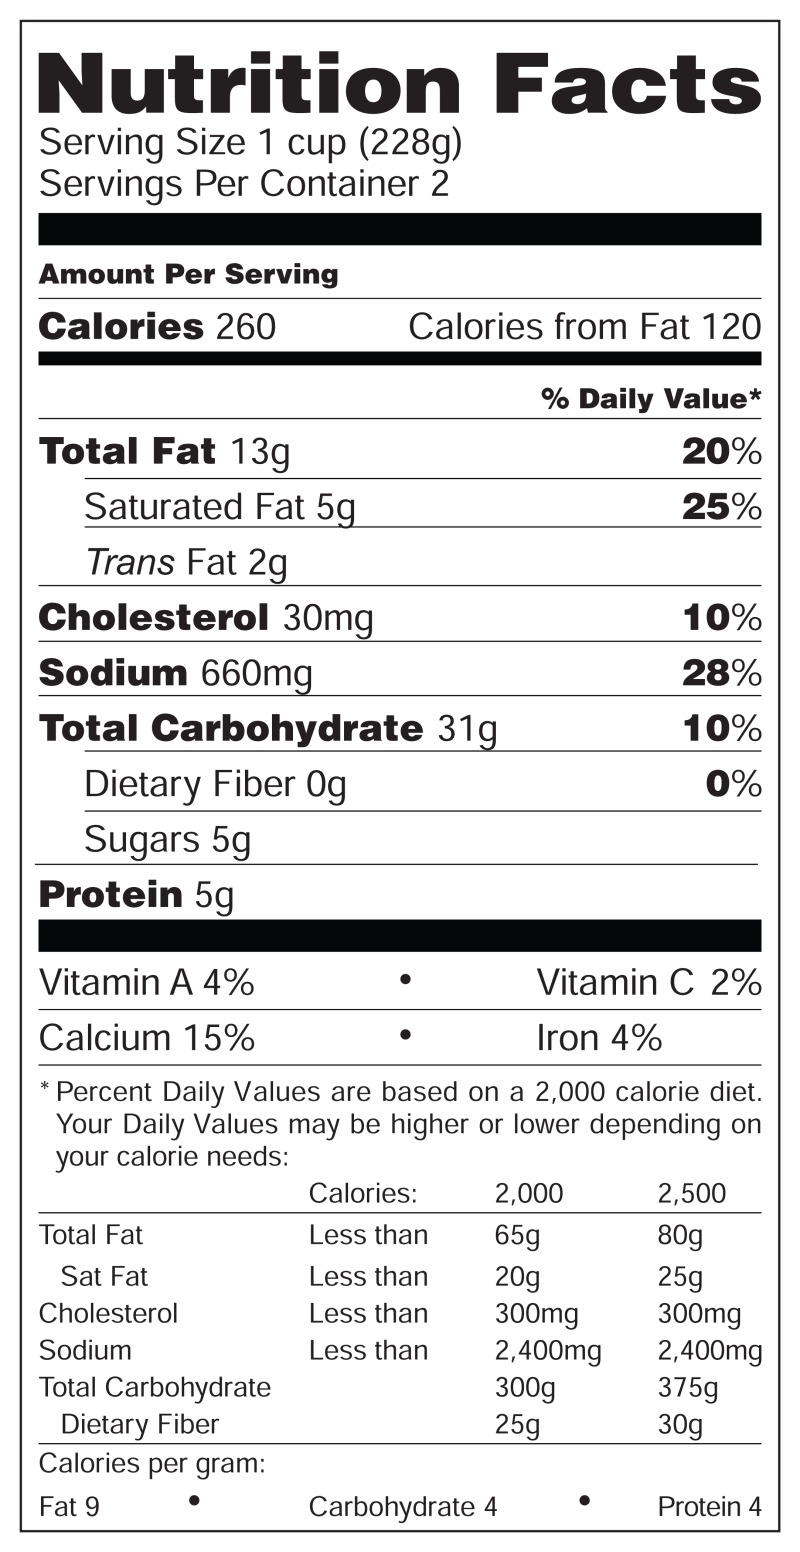 FIGURE I-1. Example of a Nutrition Facts panel.